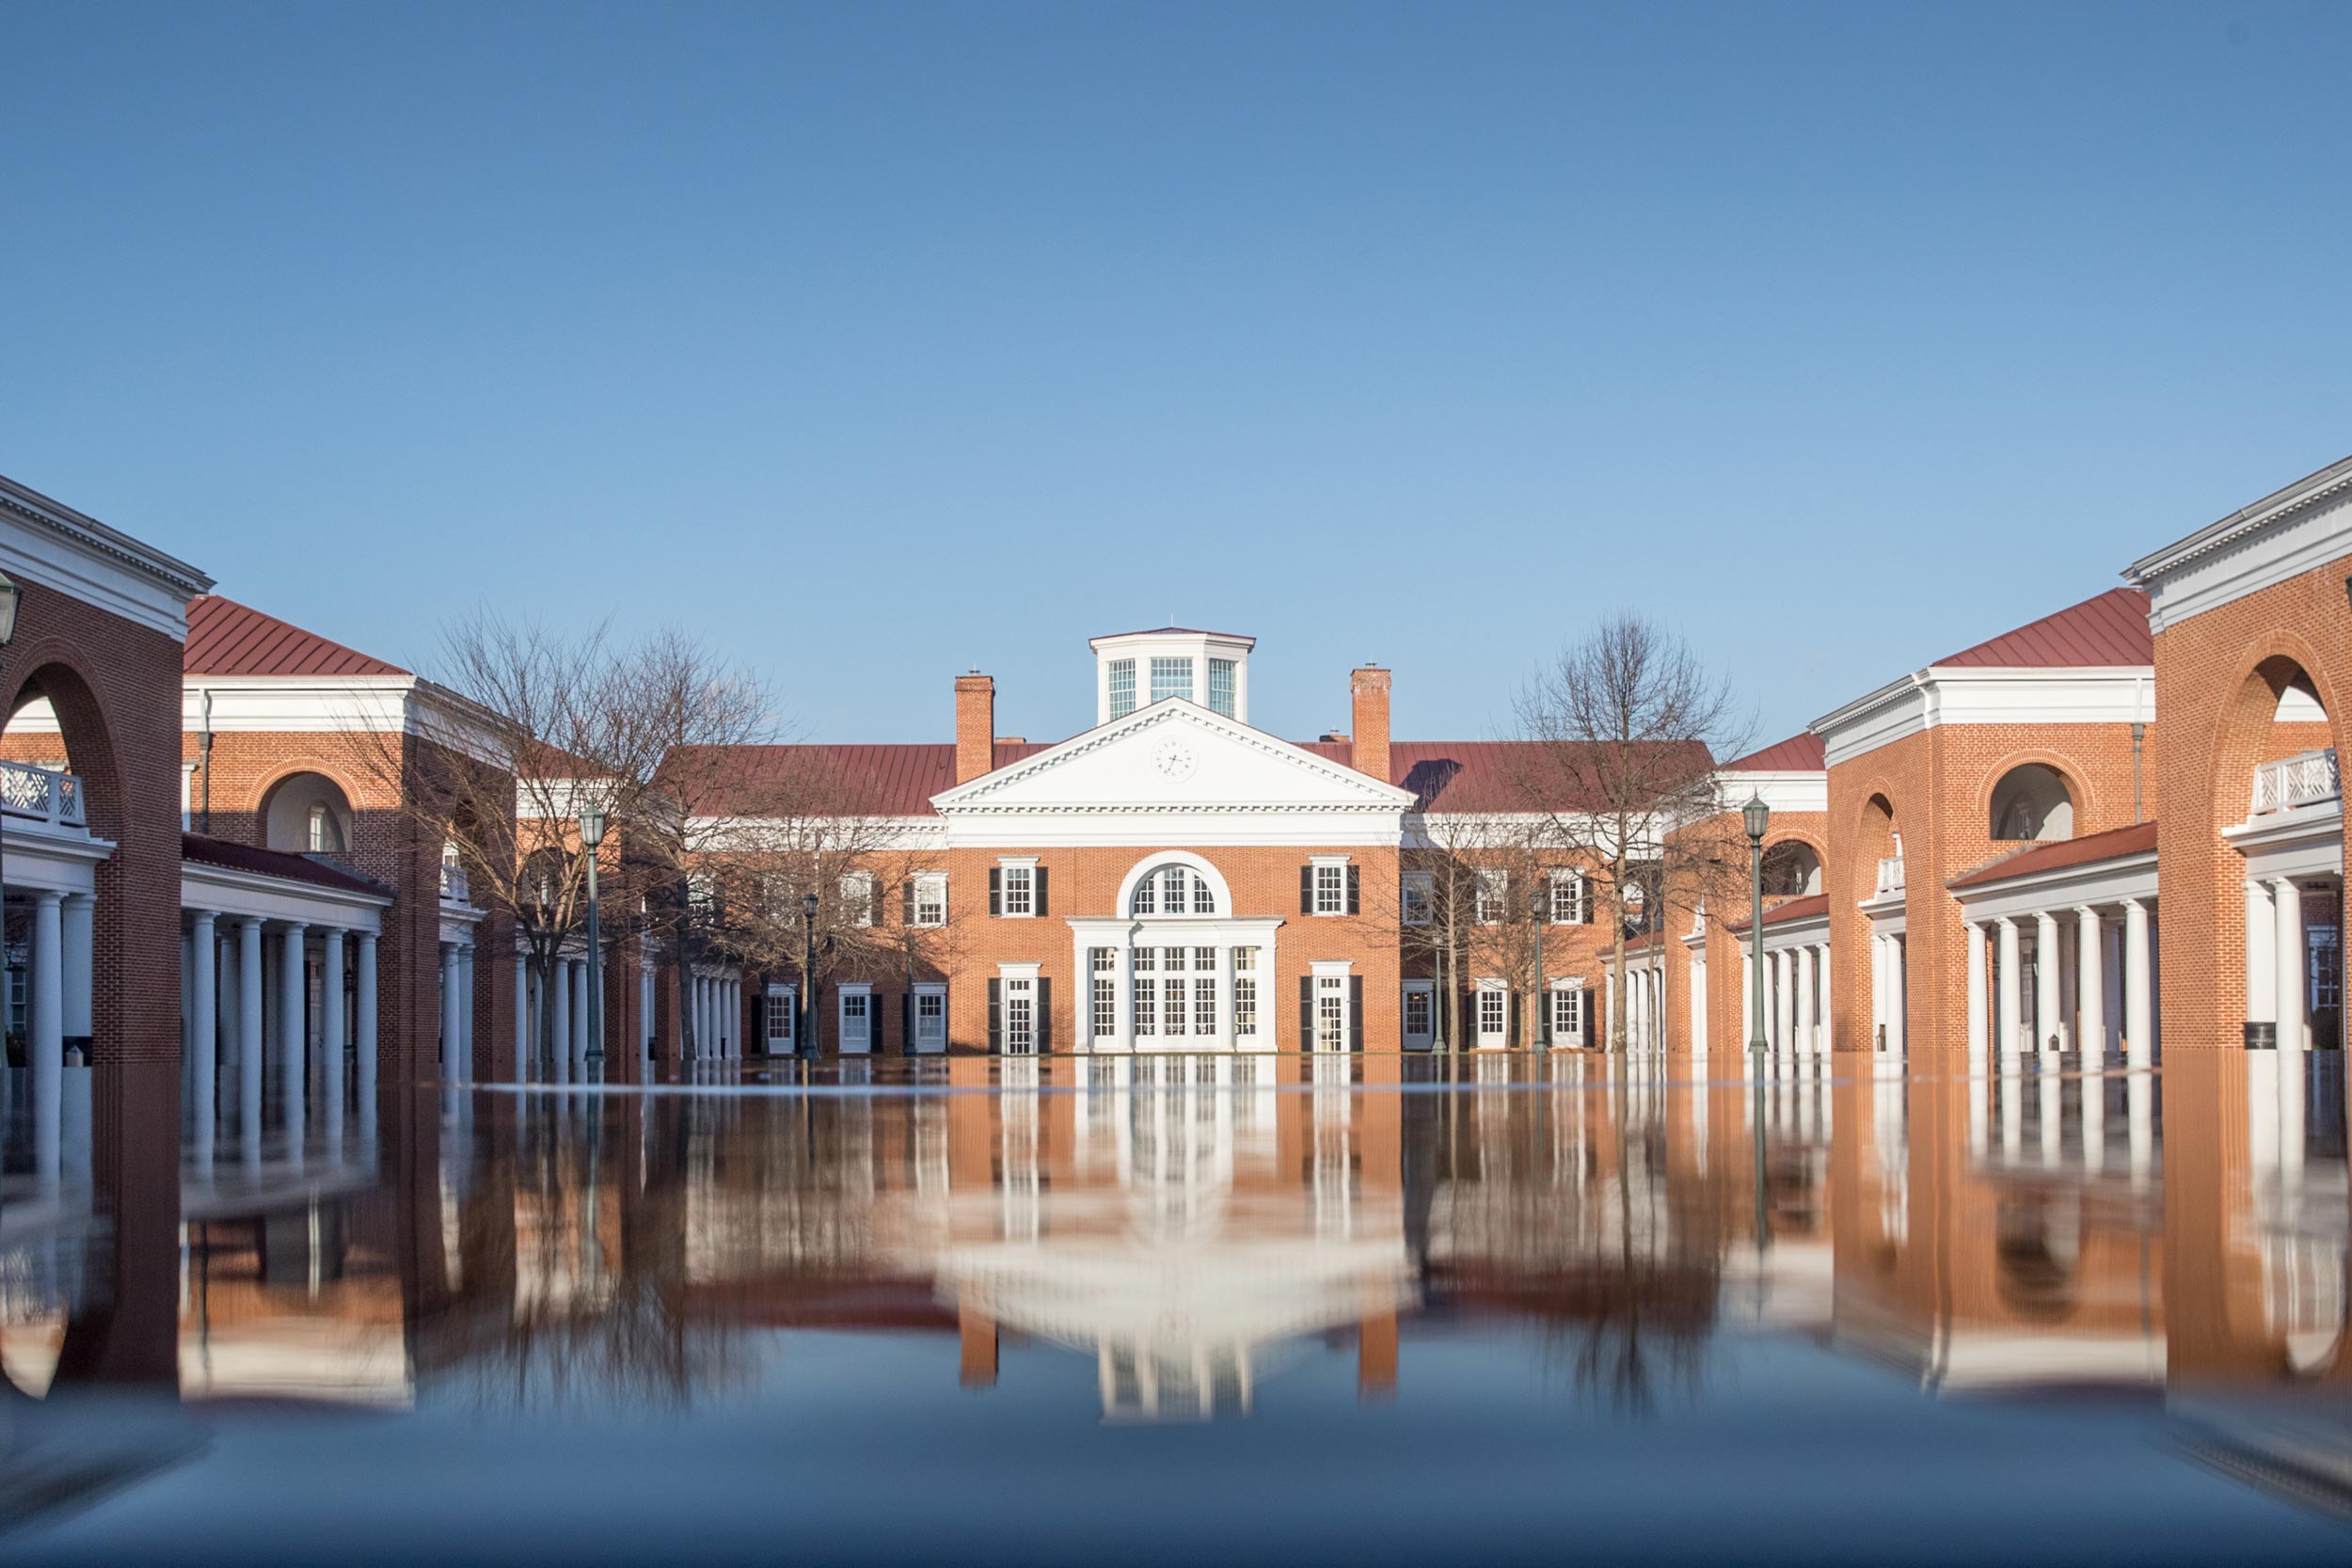 Reflection pond at Darden